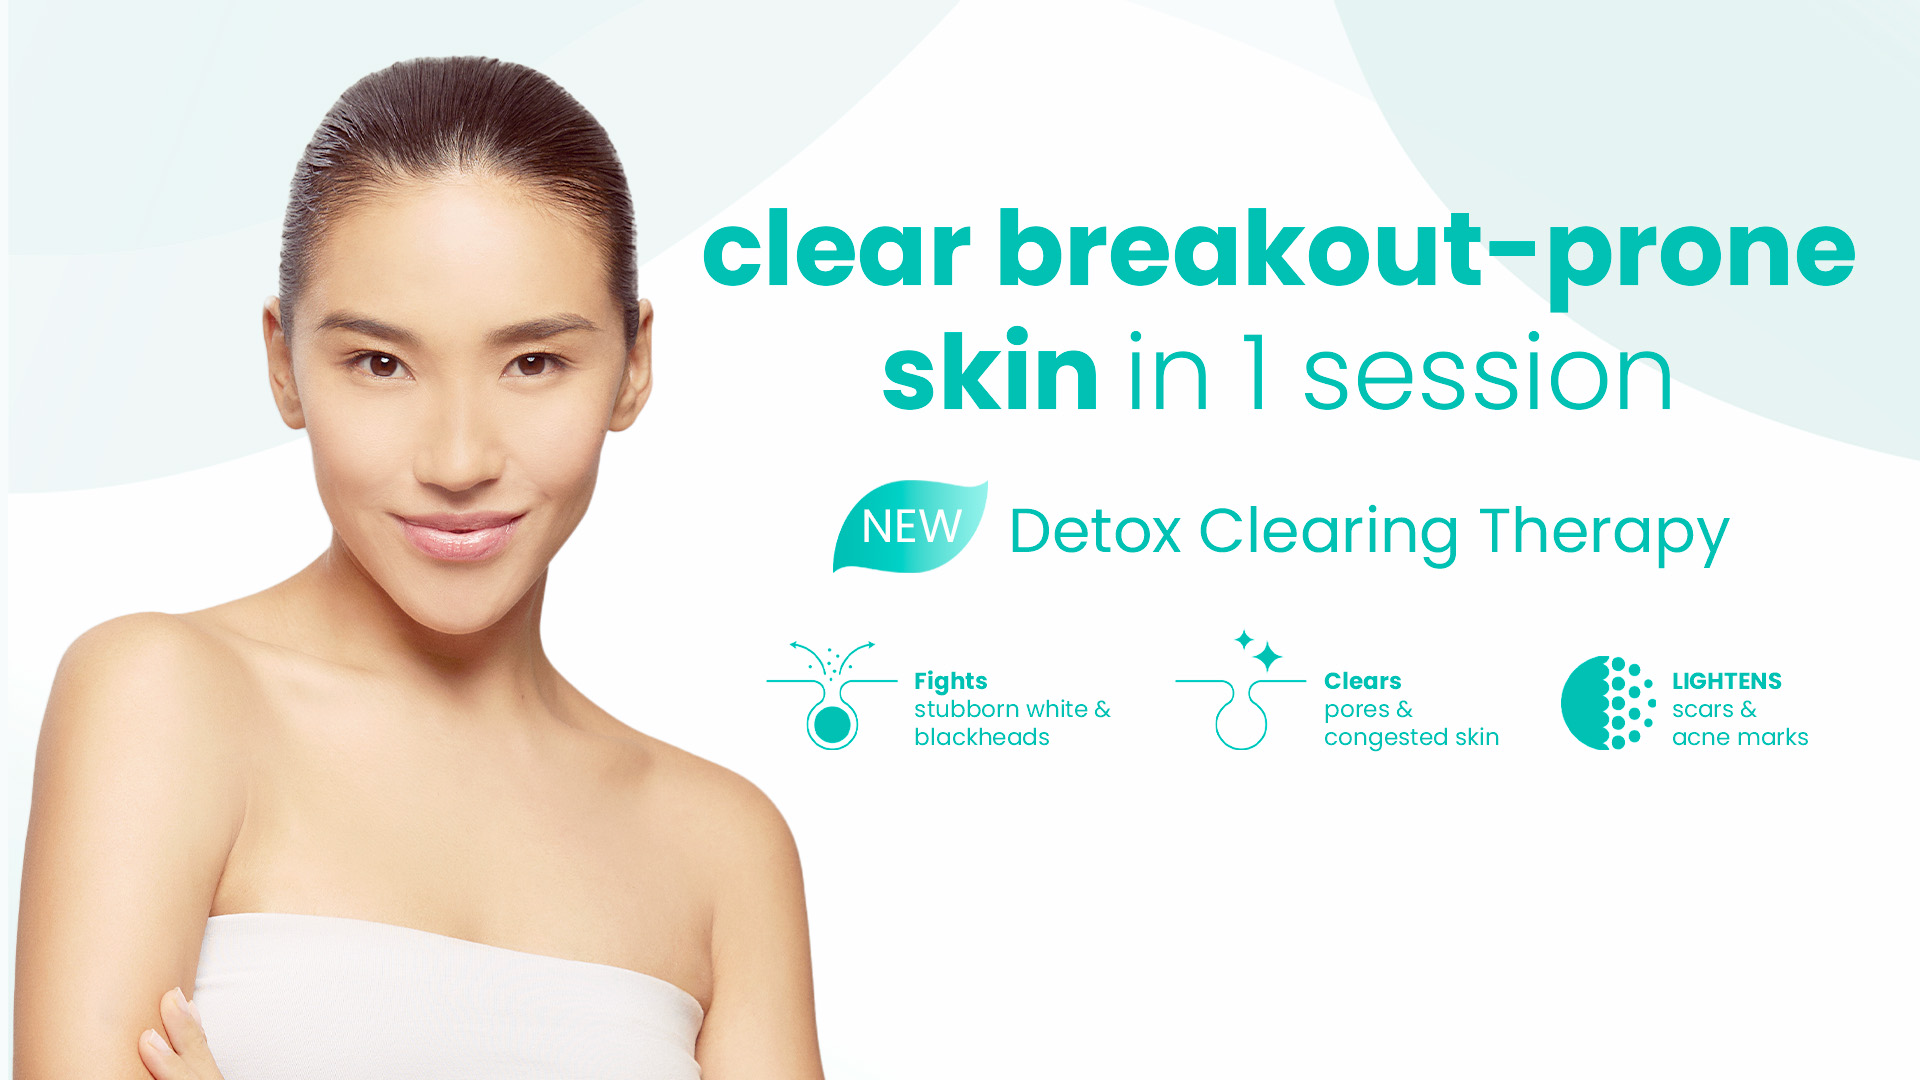 clear breakout-prone skin in 1 session with Detox Clearing Therapy